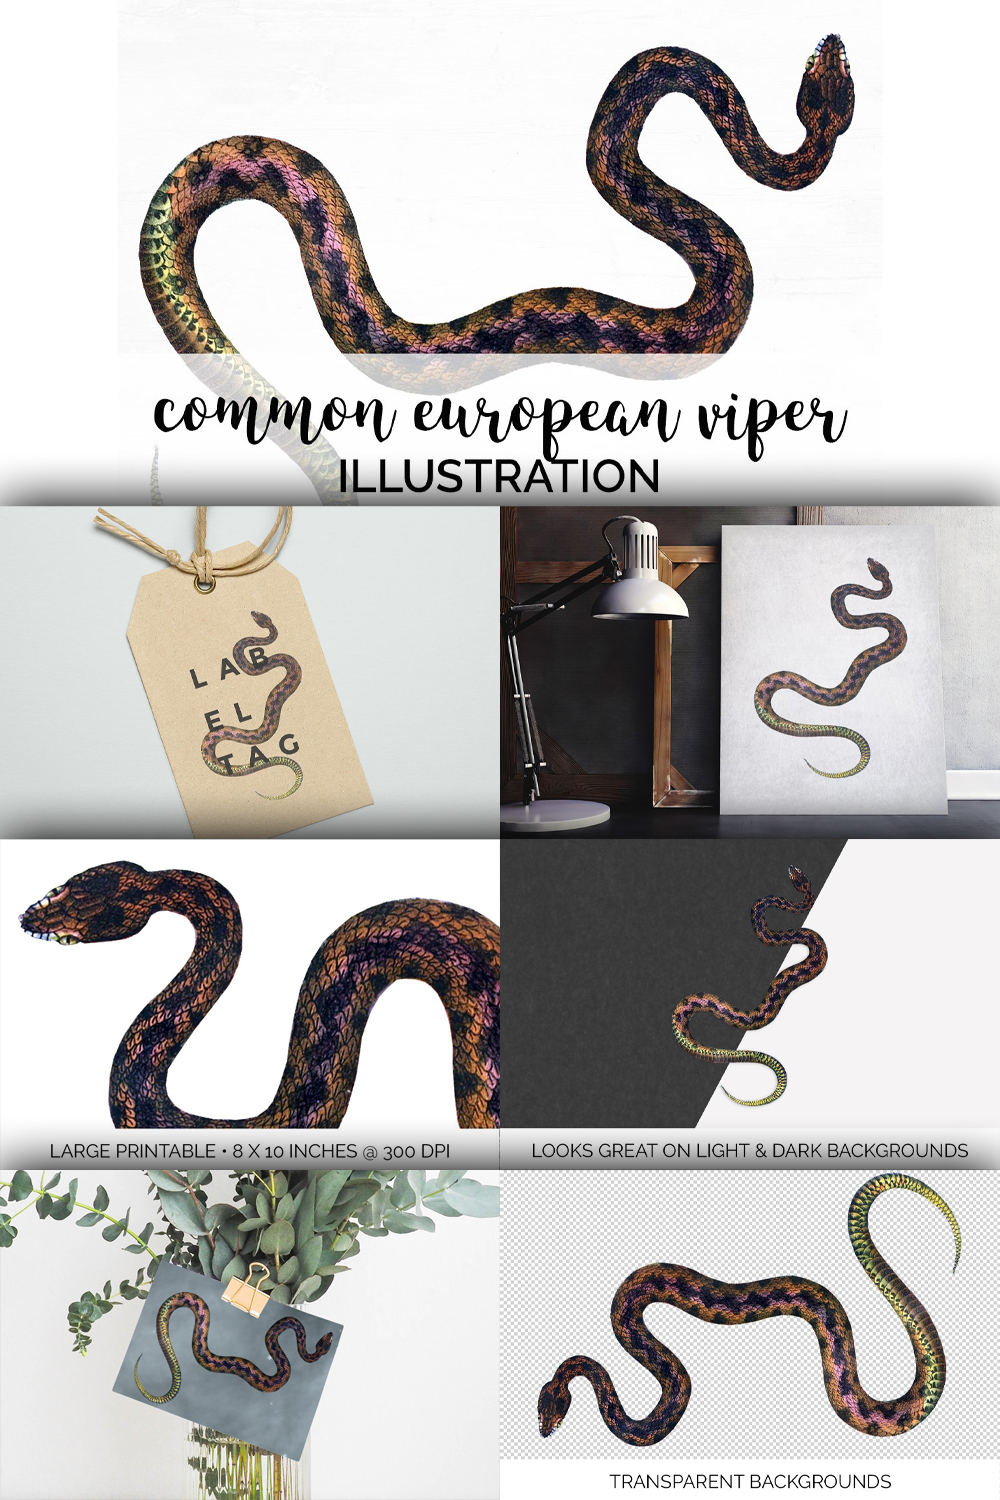 Collection of colorful images common european viper.